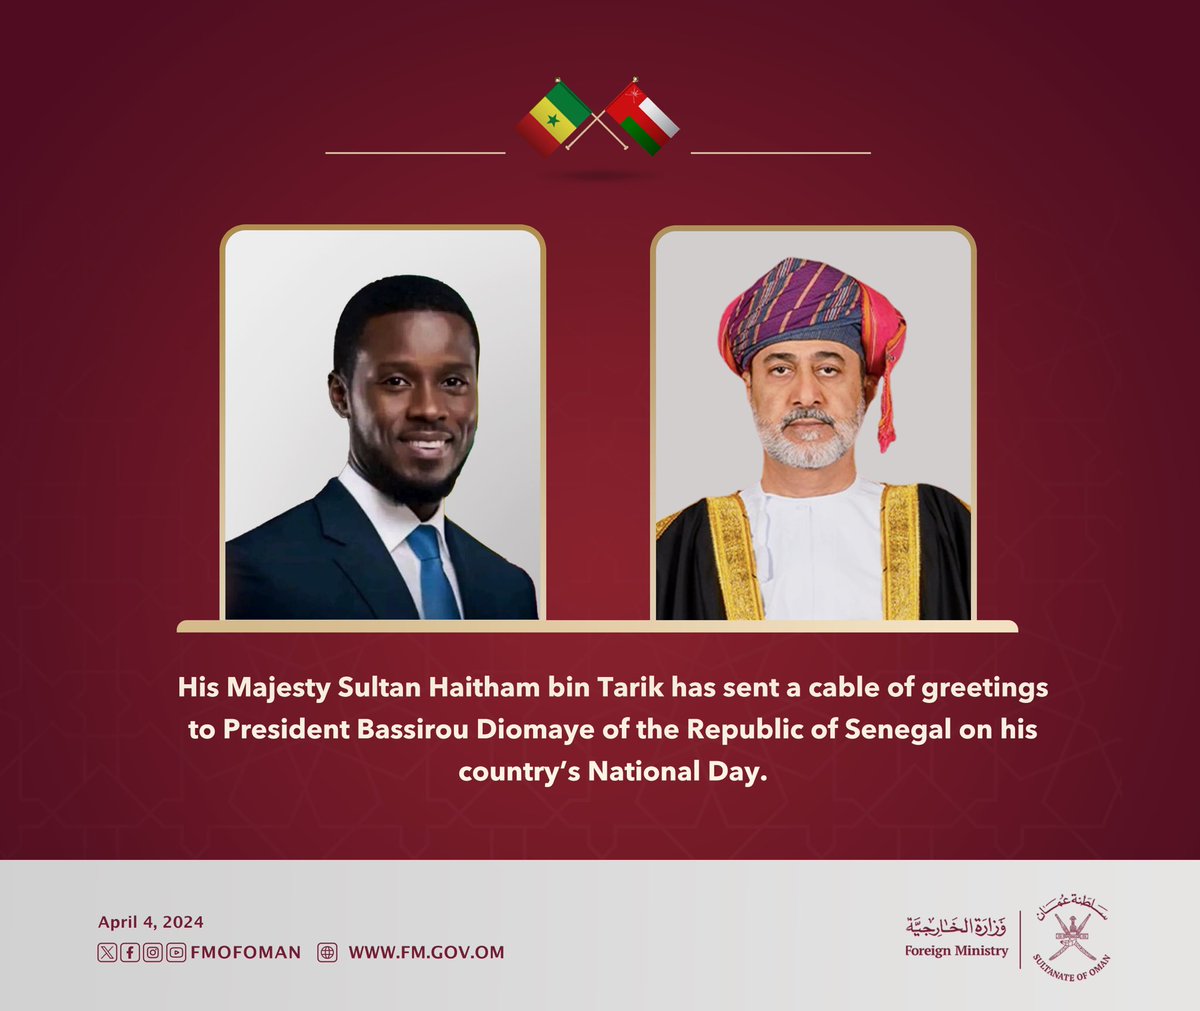 His Majesty the Sultan has sent a cable of greetings to President Bassirou Diomaye of the Republic of #Senegal on his country’s National Day.